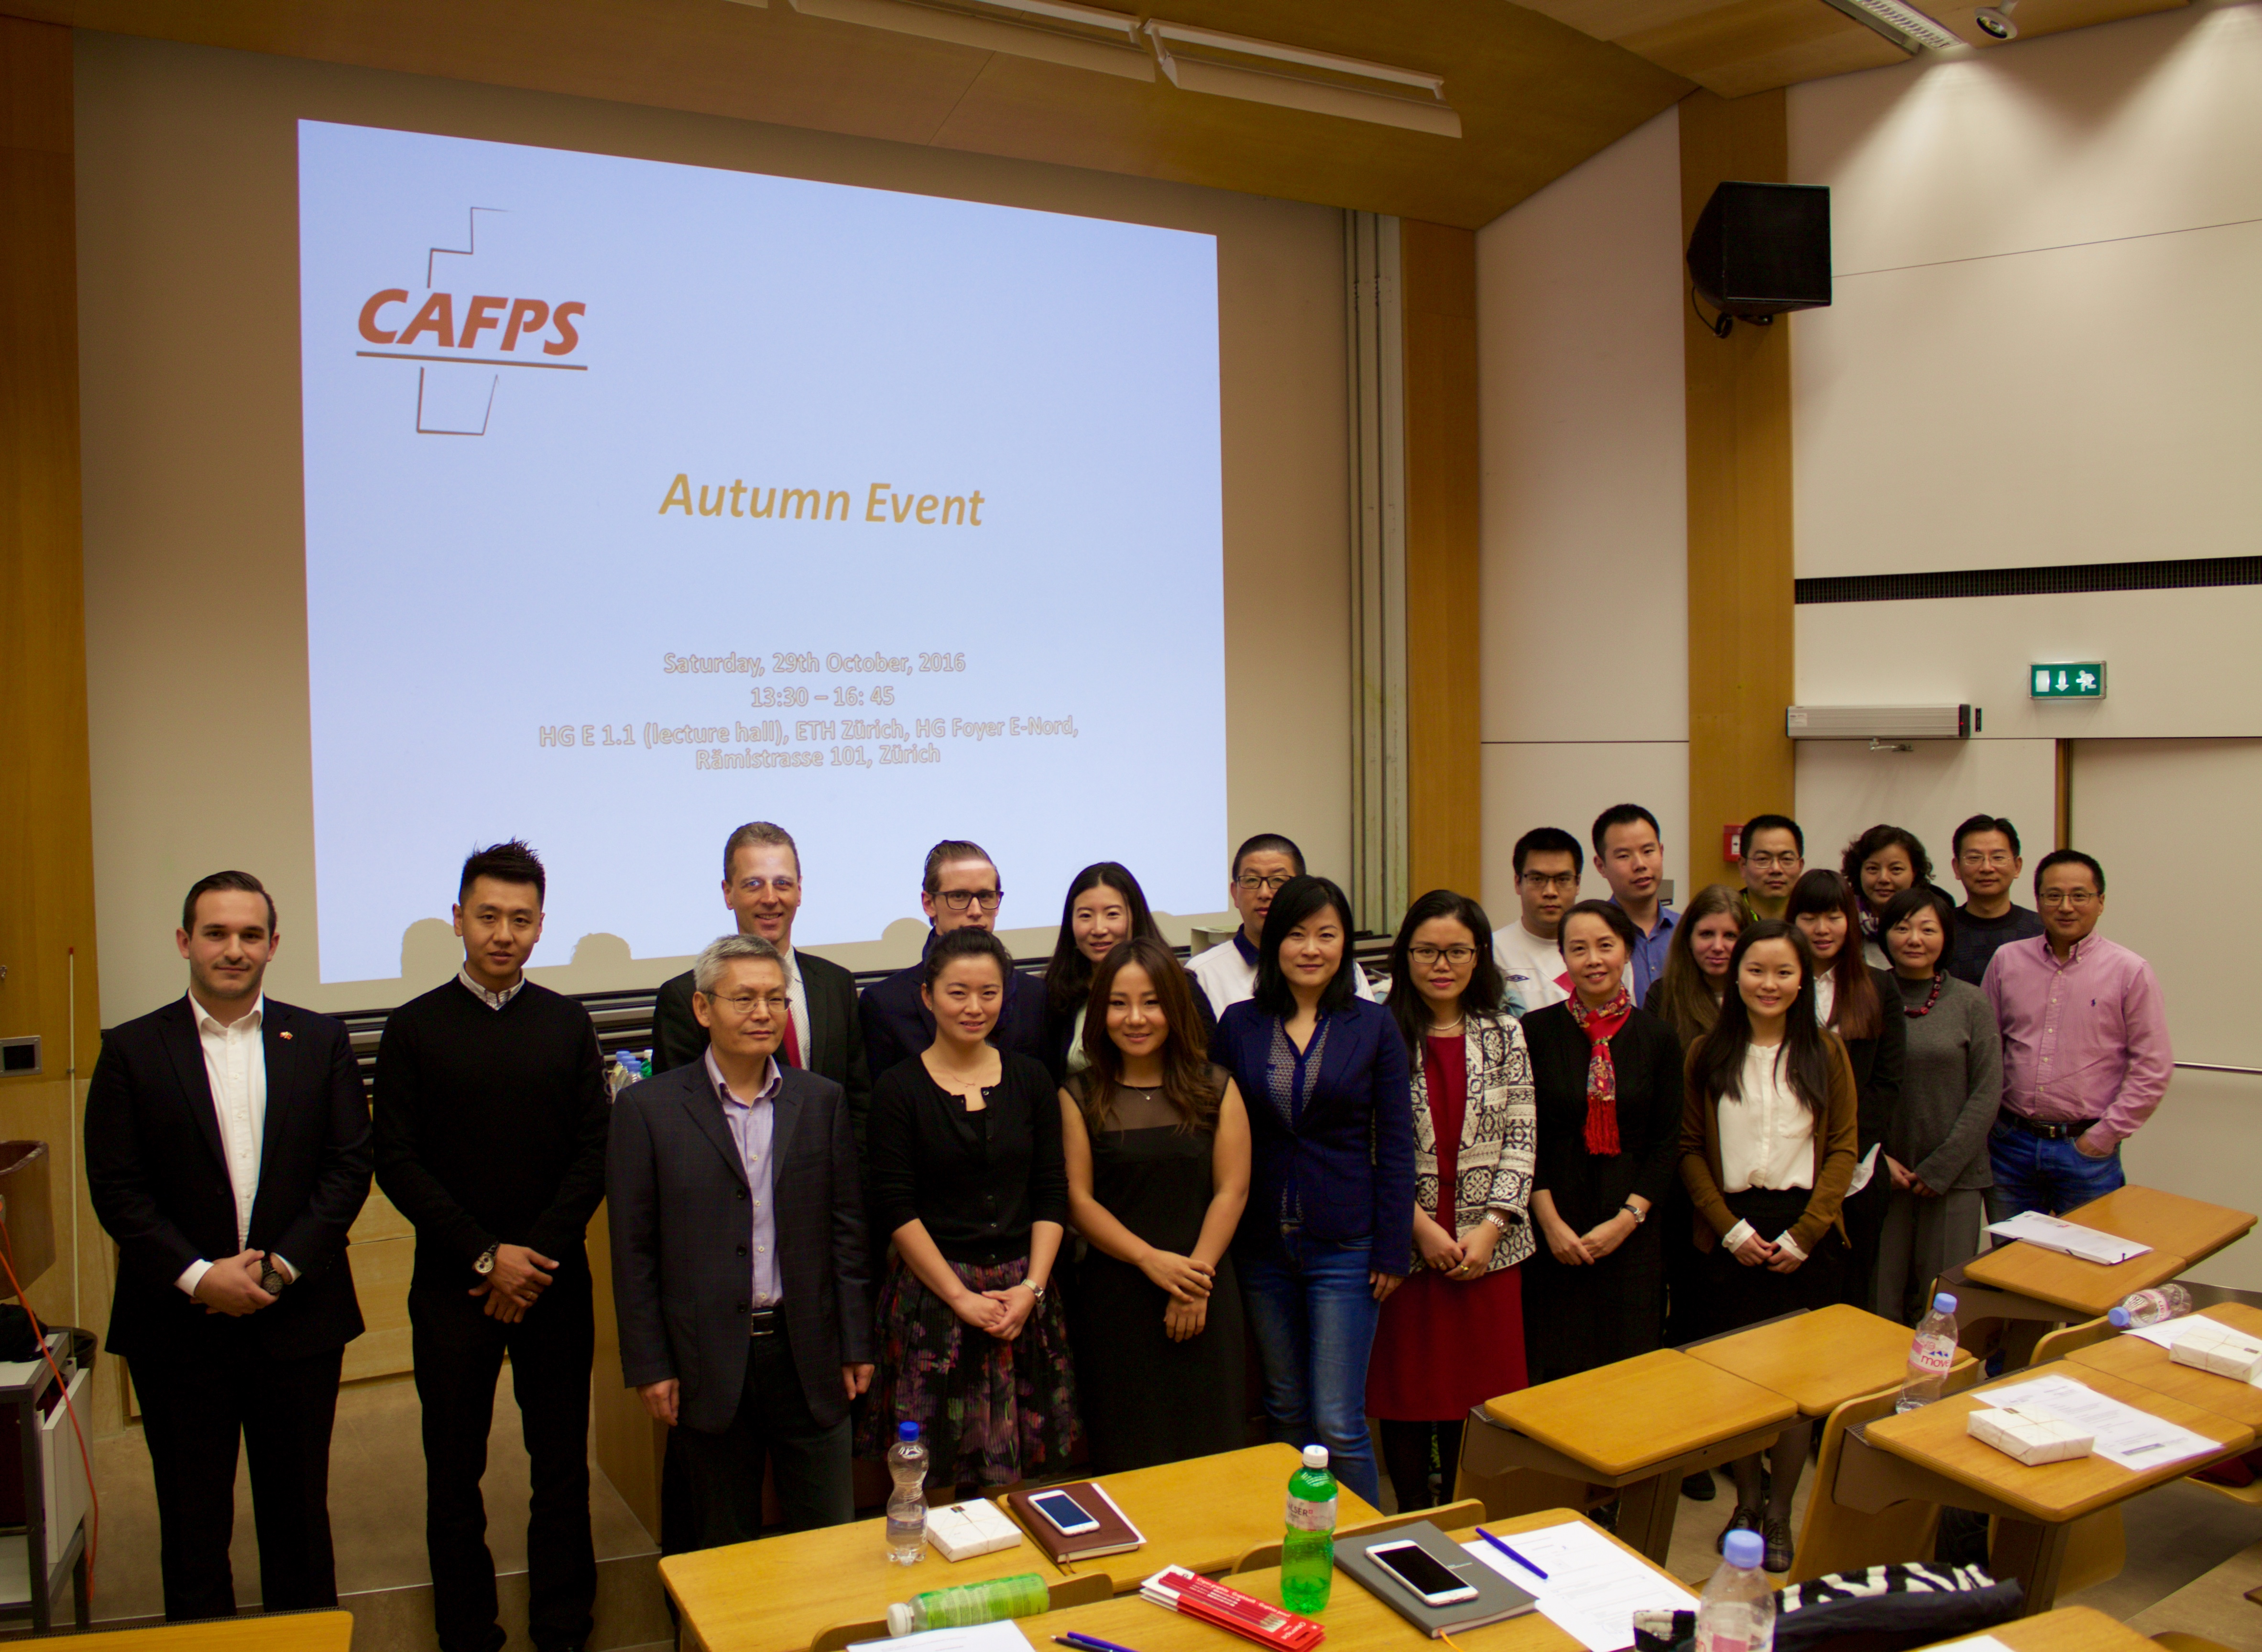 Autumn Event 2016 of the CAFPS